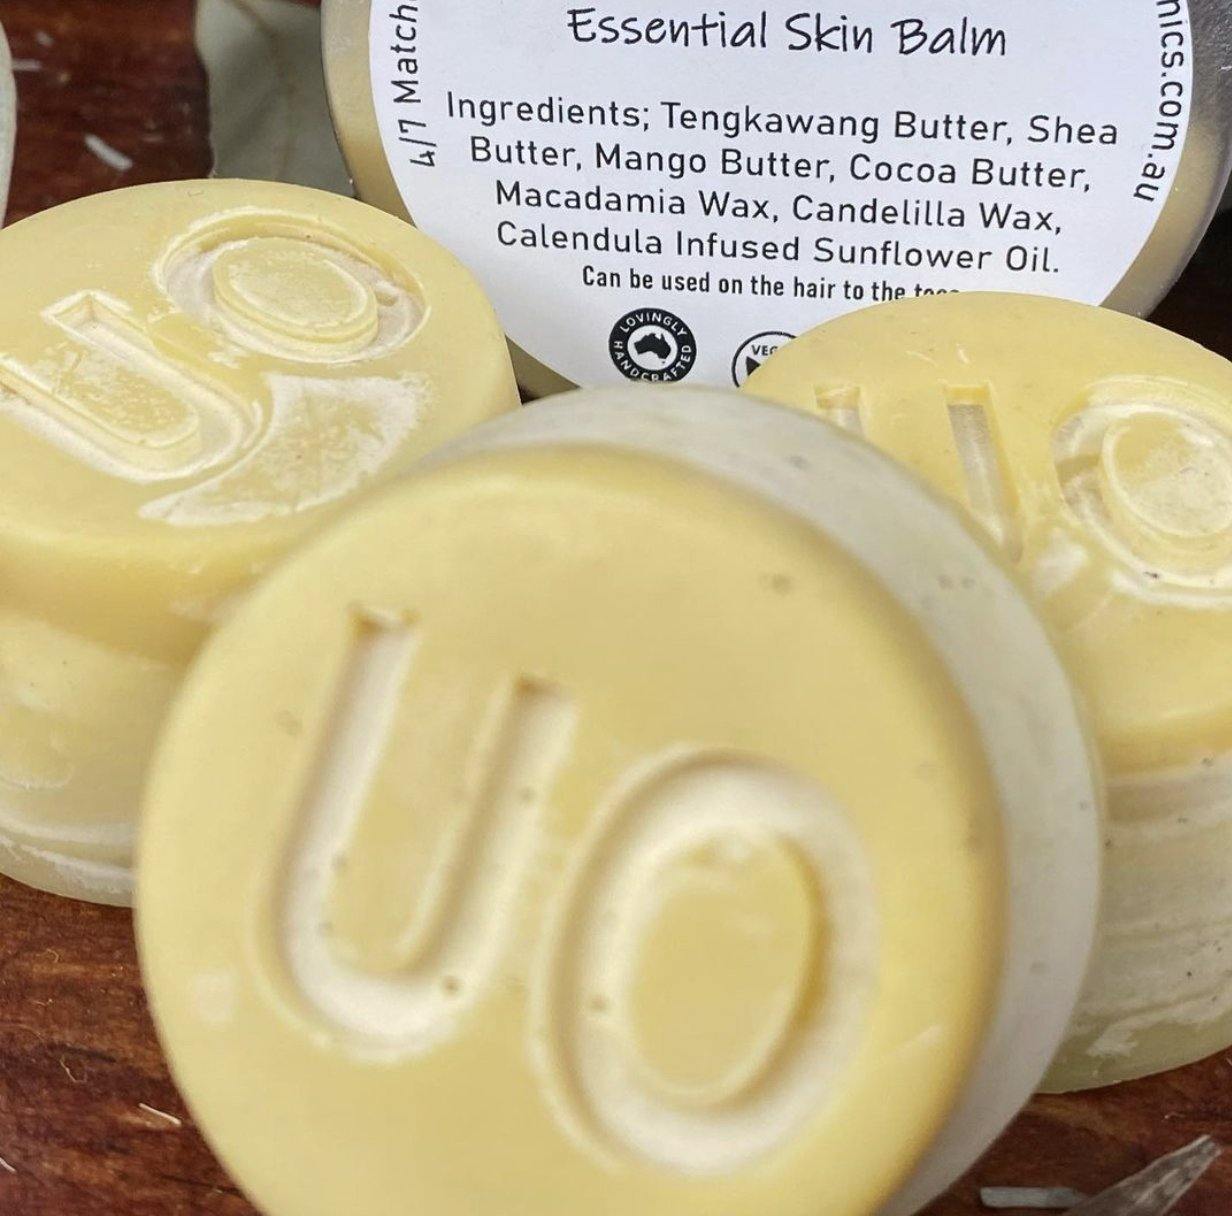 Essential Skin Balm - UrthlyOrganics Natural ethical skincare and cleaning